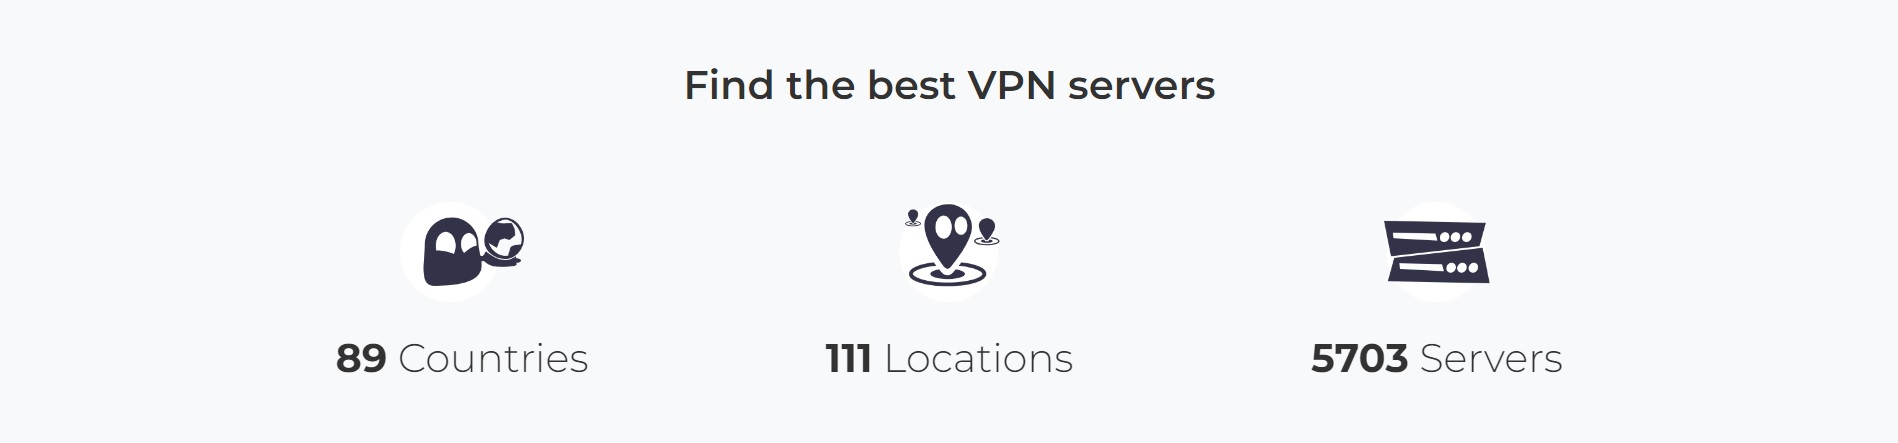 CyberGhost VPN servers and locations